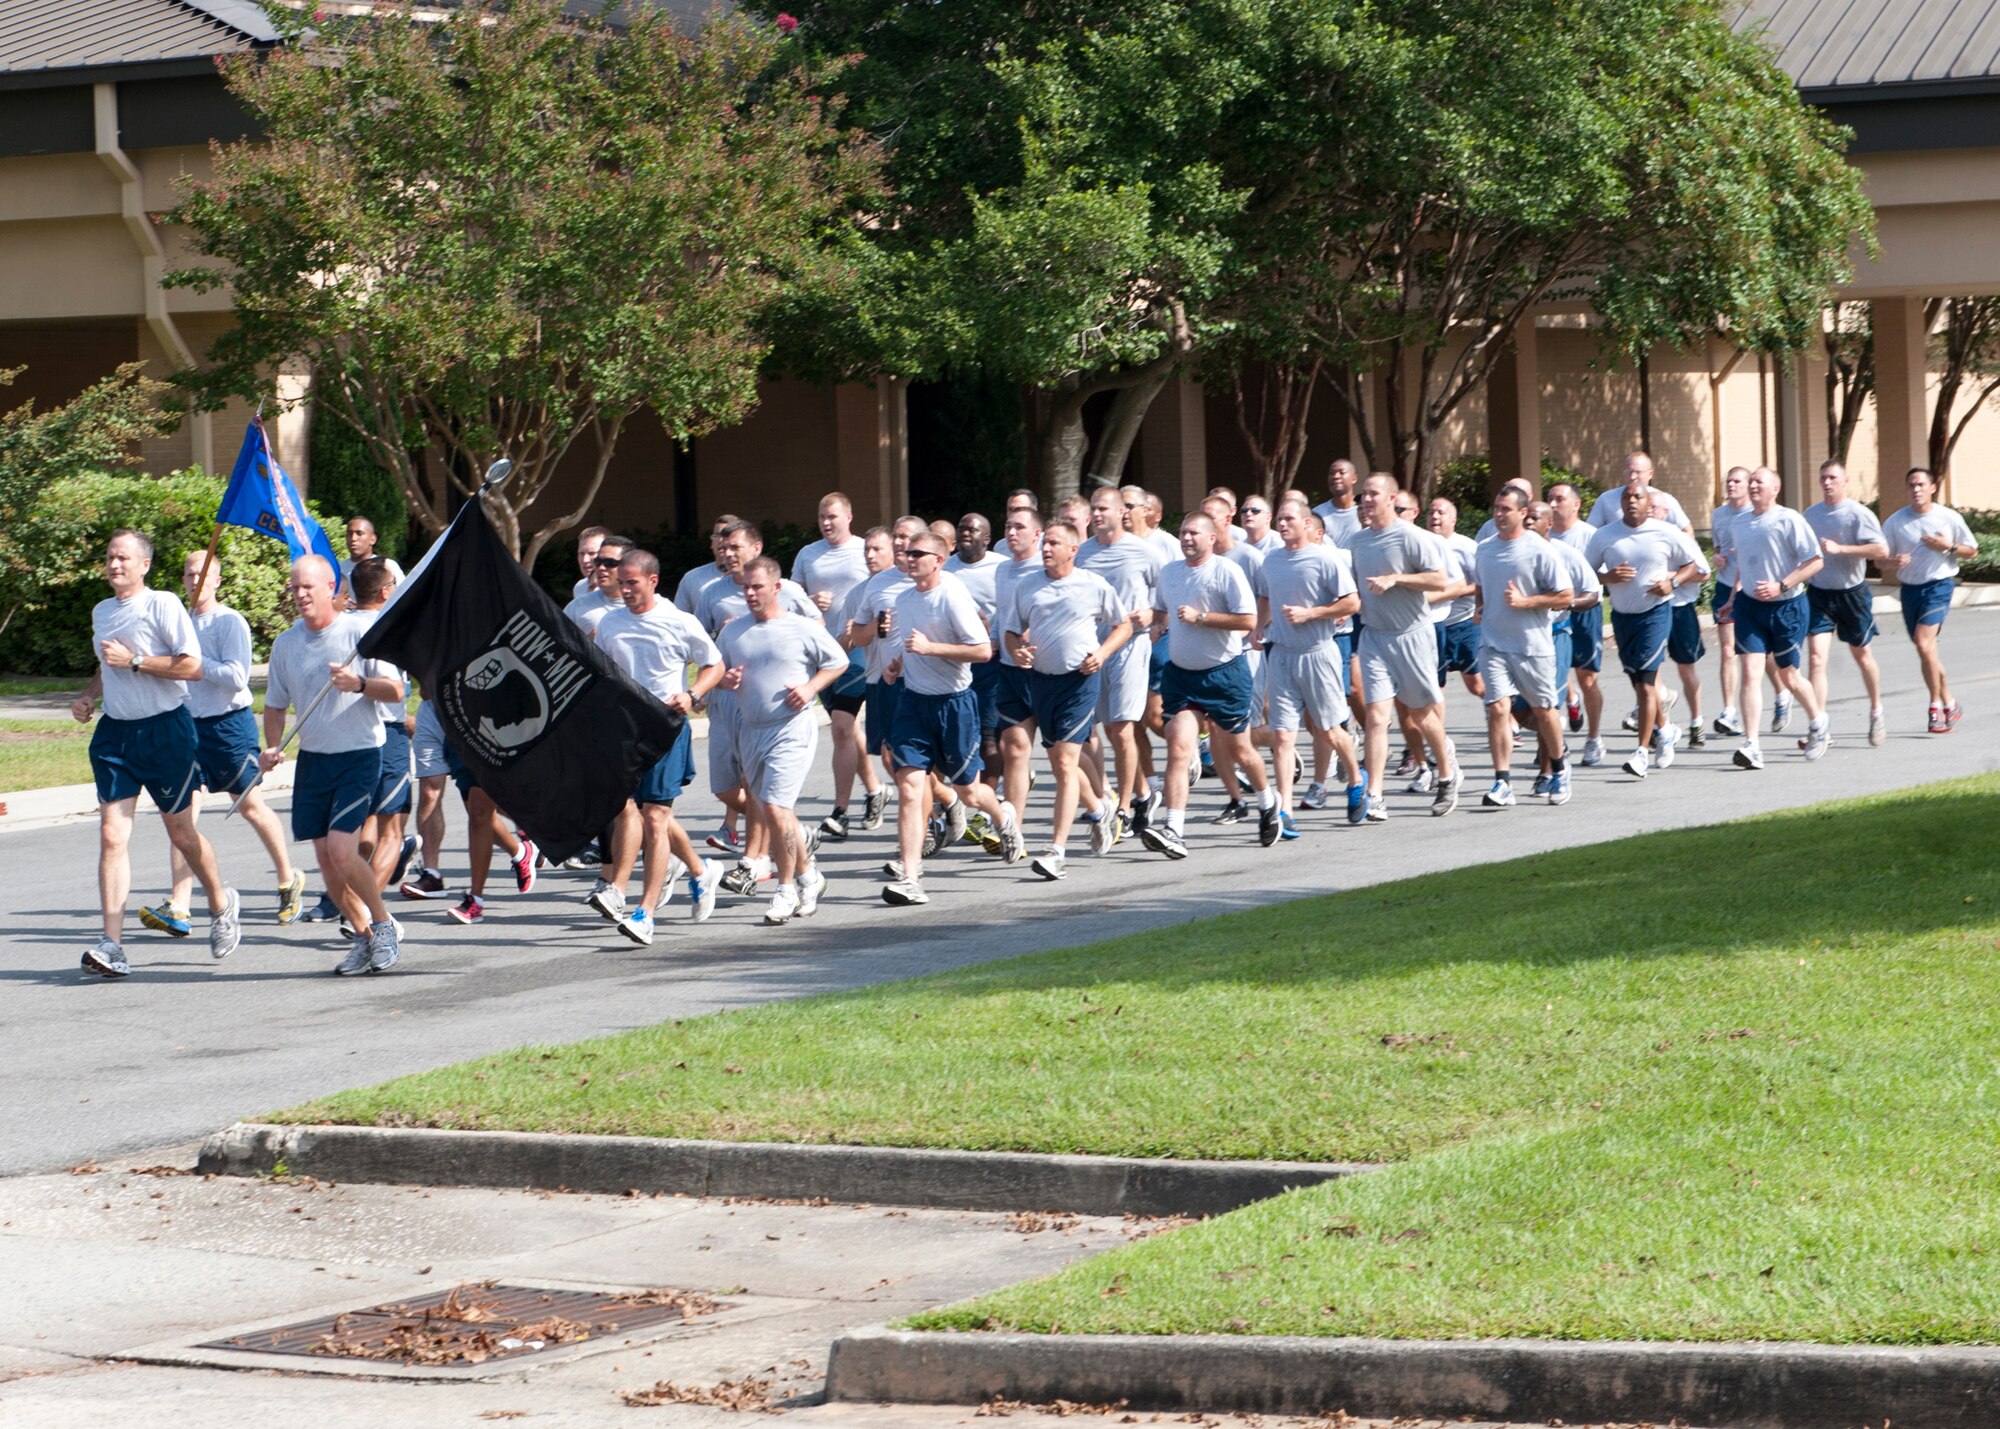 Moody Airmen finish the last few feet of the 4th annual Tiger-thon run toward  the Moody Prisoner of War/Missing in Action Memorial Park where the remembrance run ended Sept. 21, 2012, at Moody Air Force Base, Ga. Twenty three units on the base ran the 23-mile relay run, tapping each other out at each mile, with some continuing further in remembrance of the men and women who have yet to come home from war. (U.S. Air Force photo by Senior Airman Eileen Meier/Released)